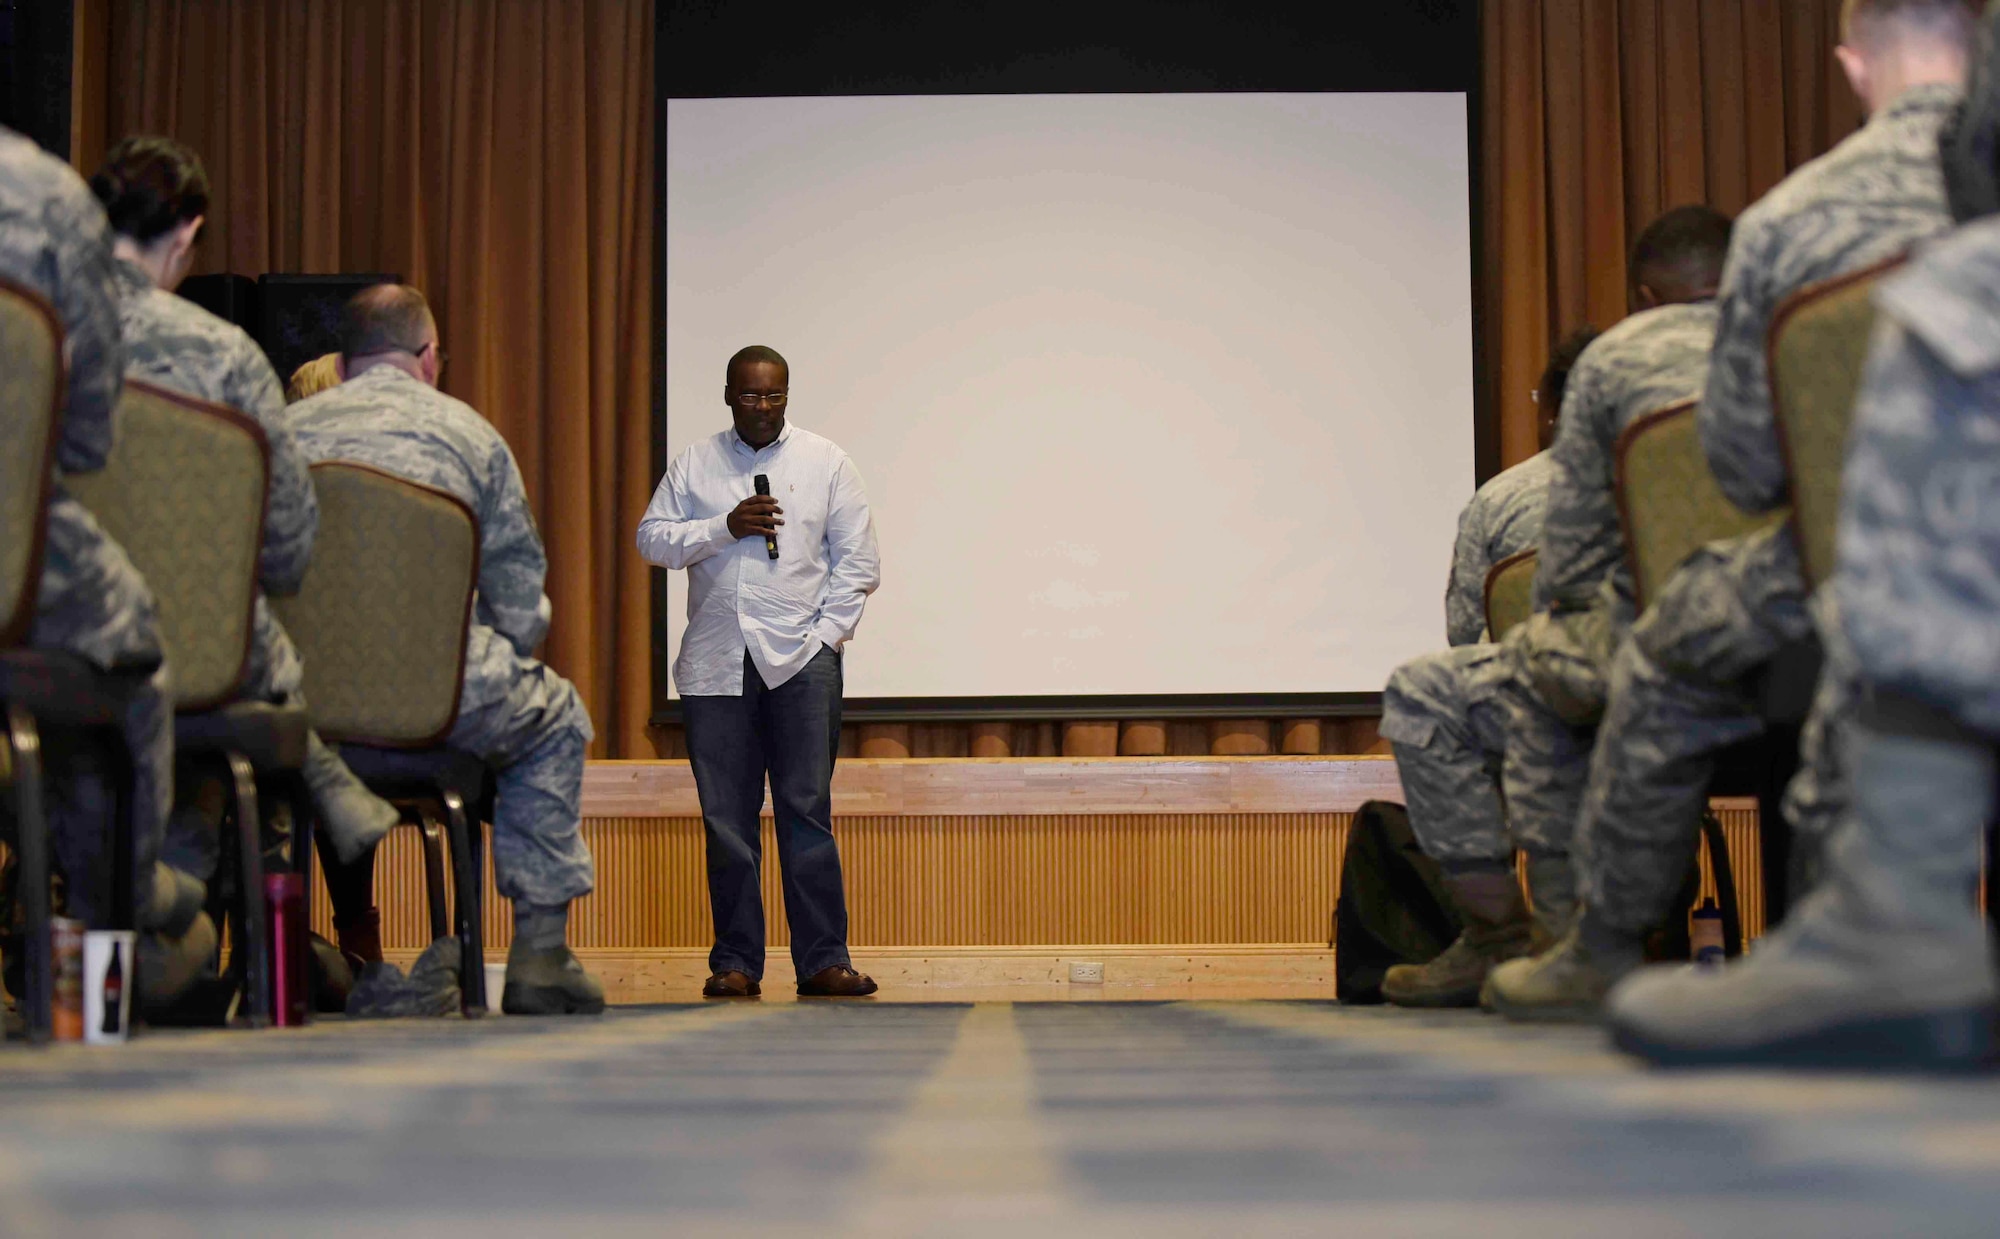 Master Sgt. Wendell Barnes, the 35th Aircraft Maintenance Squadron commander support staff superintendent, tells his story during Resilient Airmen Day at Misawa Air Base, Japan, Oct. 2, 2015. Barnes spoke to more than 250 people about how his spirituality guided him through a difficult situation in his life. (U.S. Air Force photo/Airman 1st Class Jordyn Fetter)